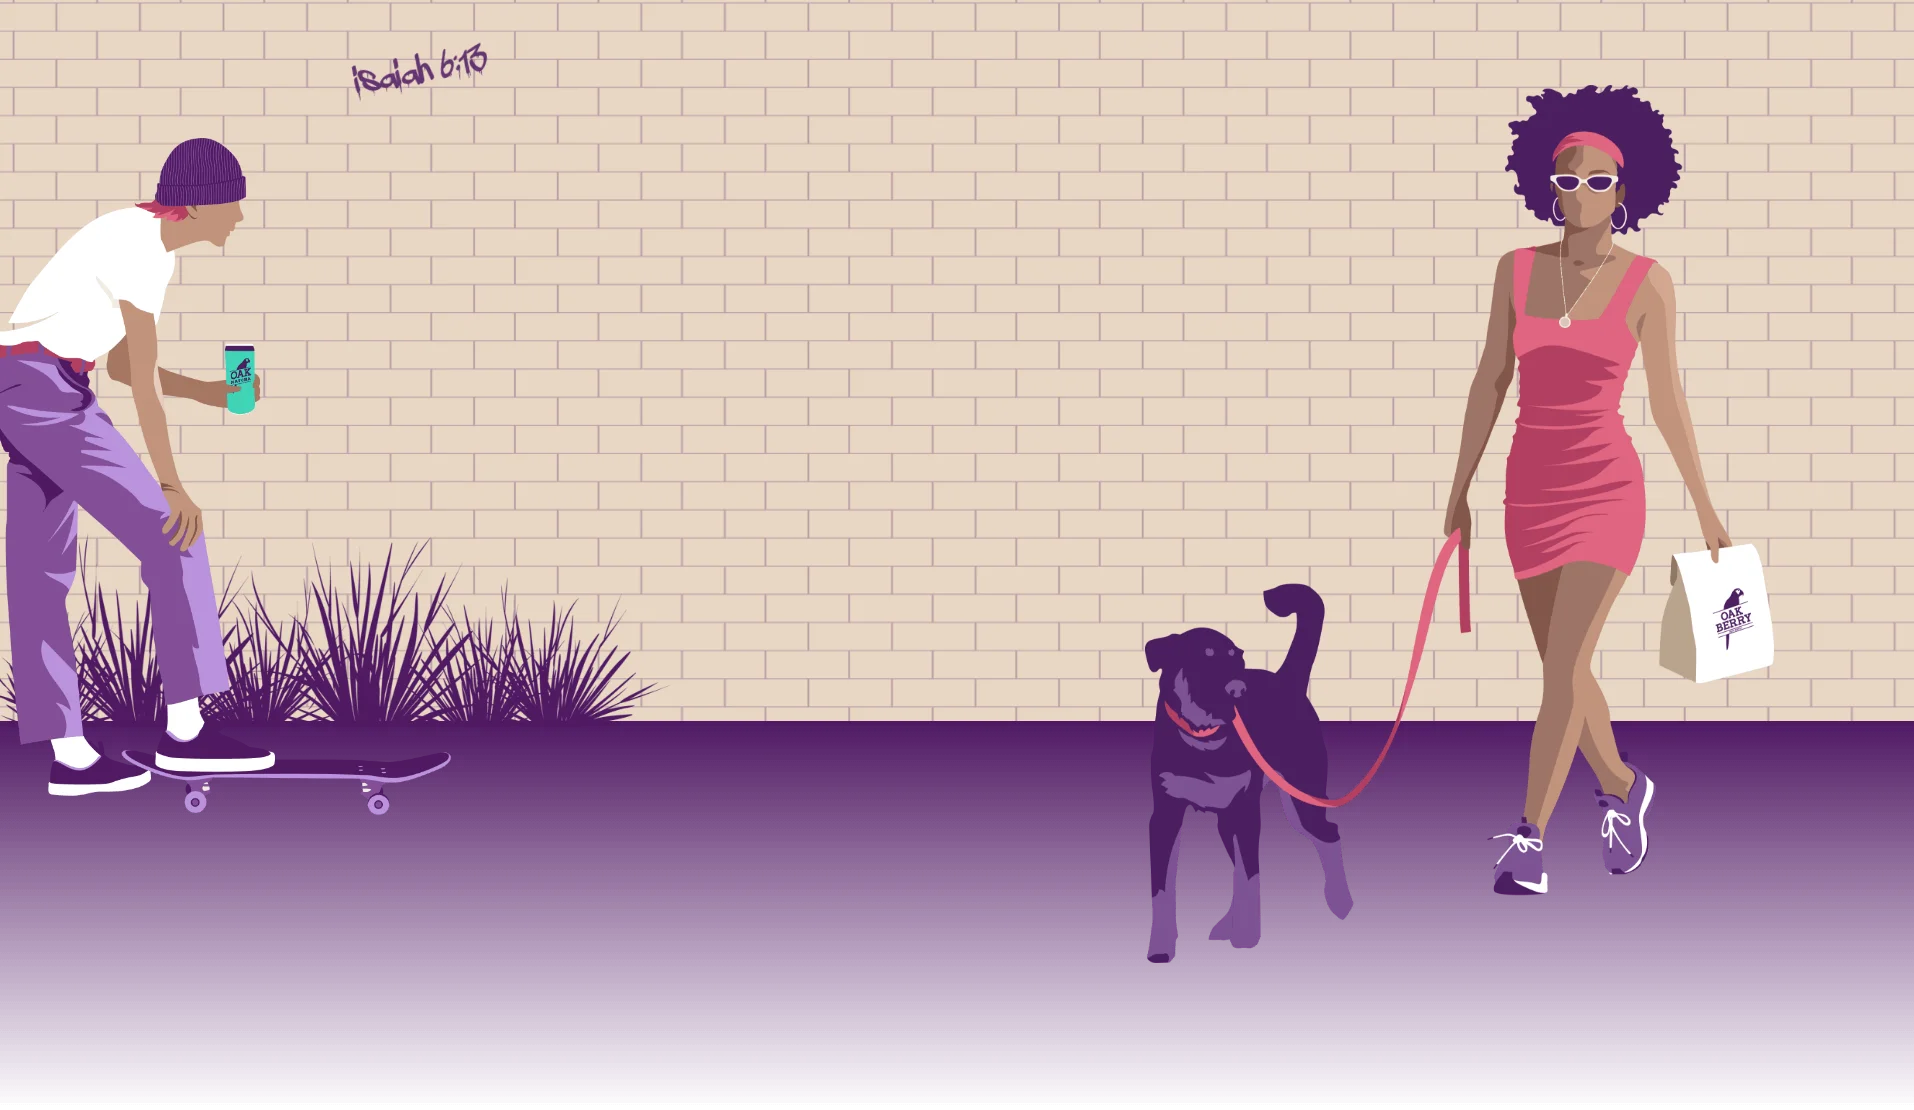 An illustration of a woman walking a dog and a man with a skateboard.